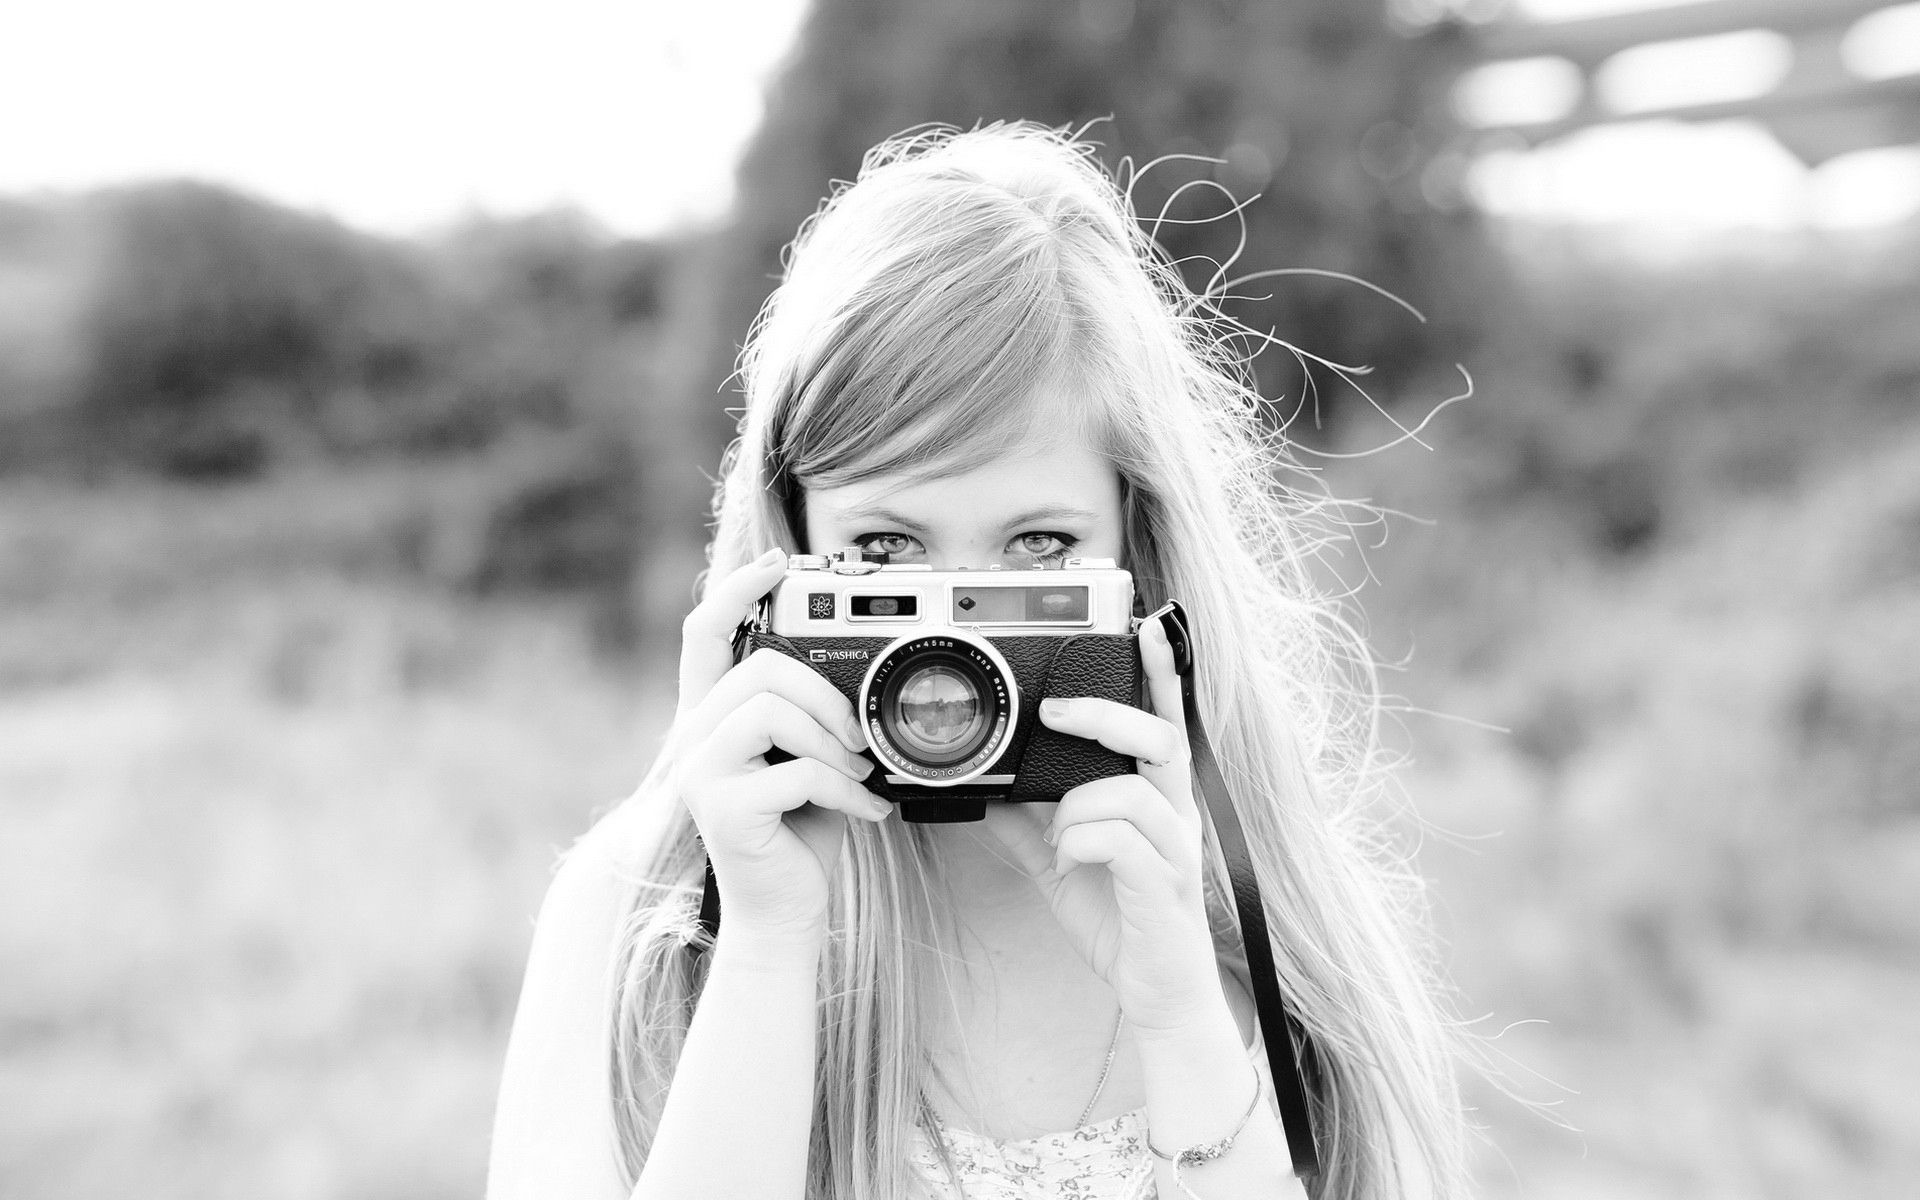 Free download Girl with camera black and white photo wallpaper